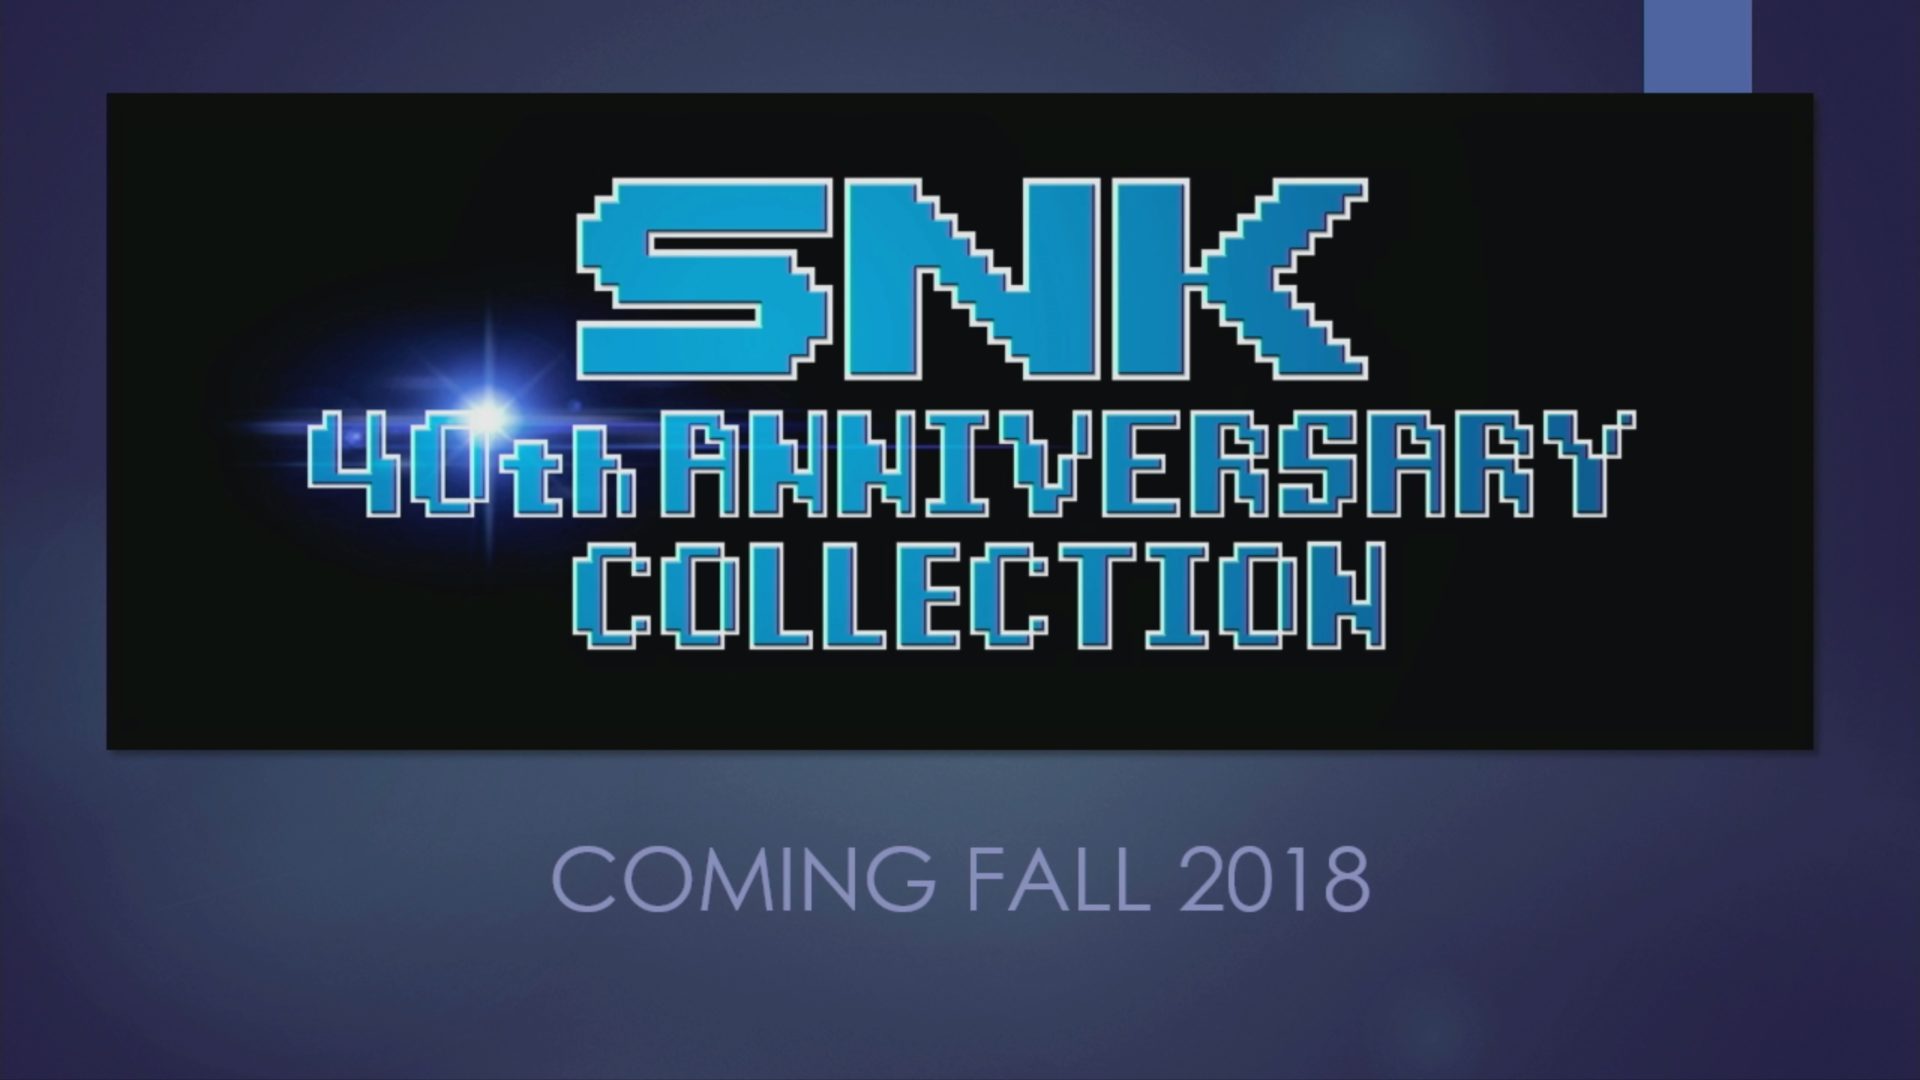 SNK 40th Anniversary Collection deze herfst